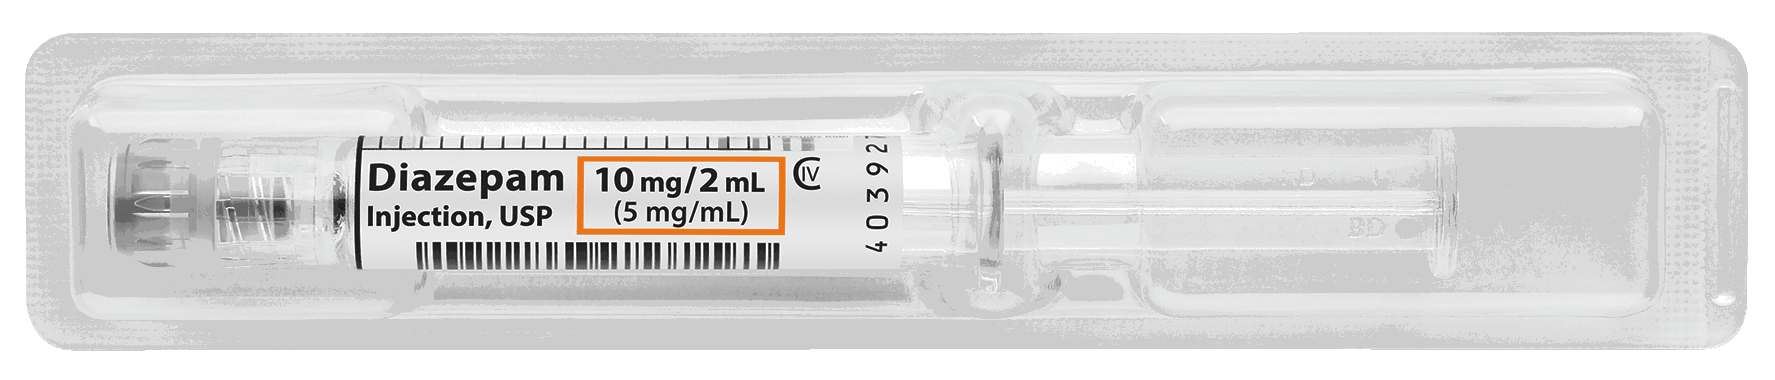 Product Label image for 10 mg per 12mL of Diazepam